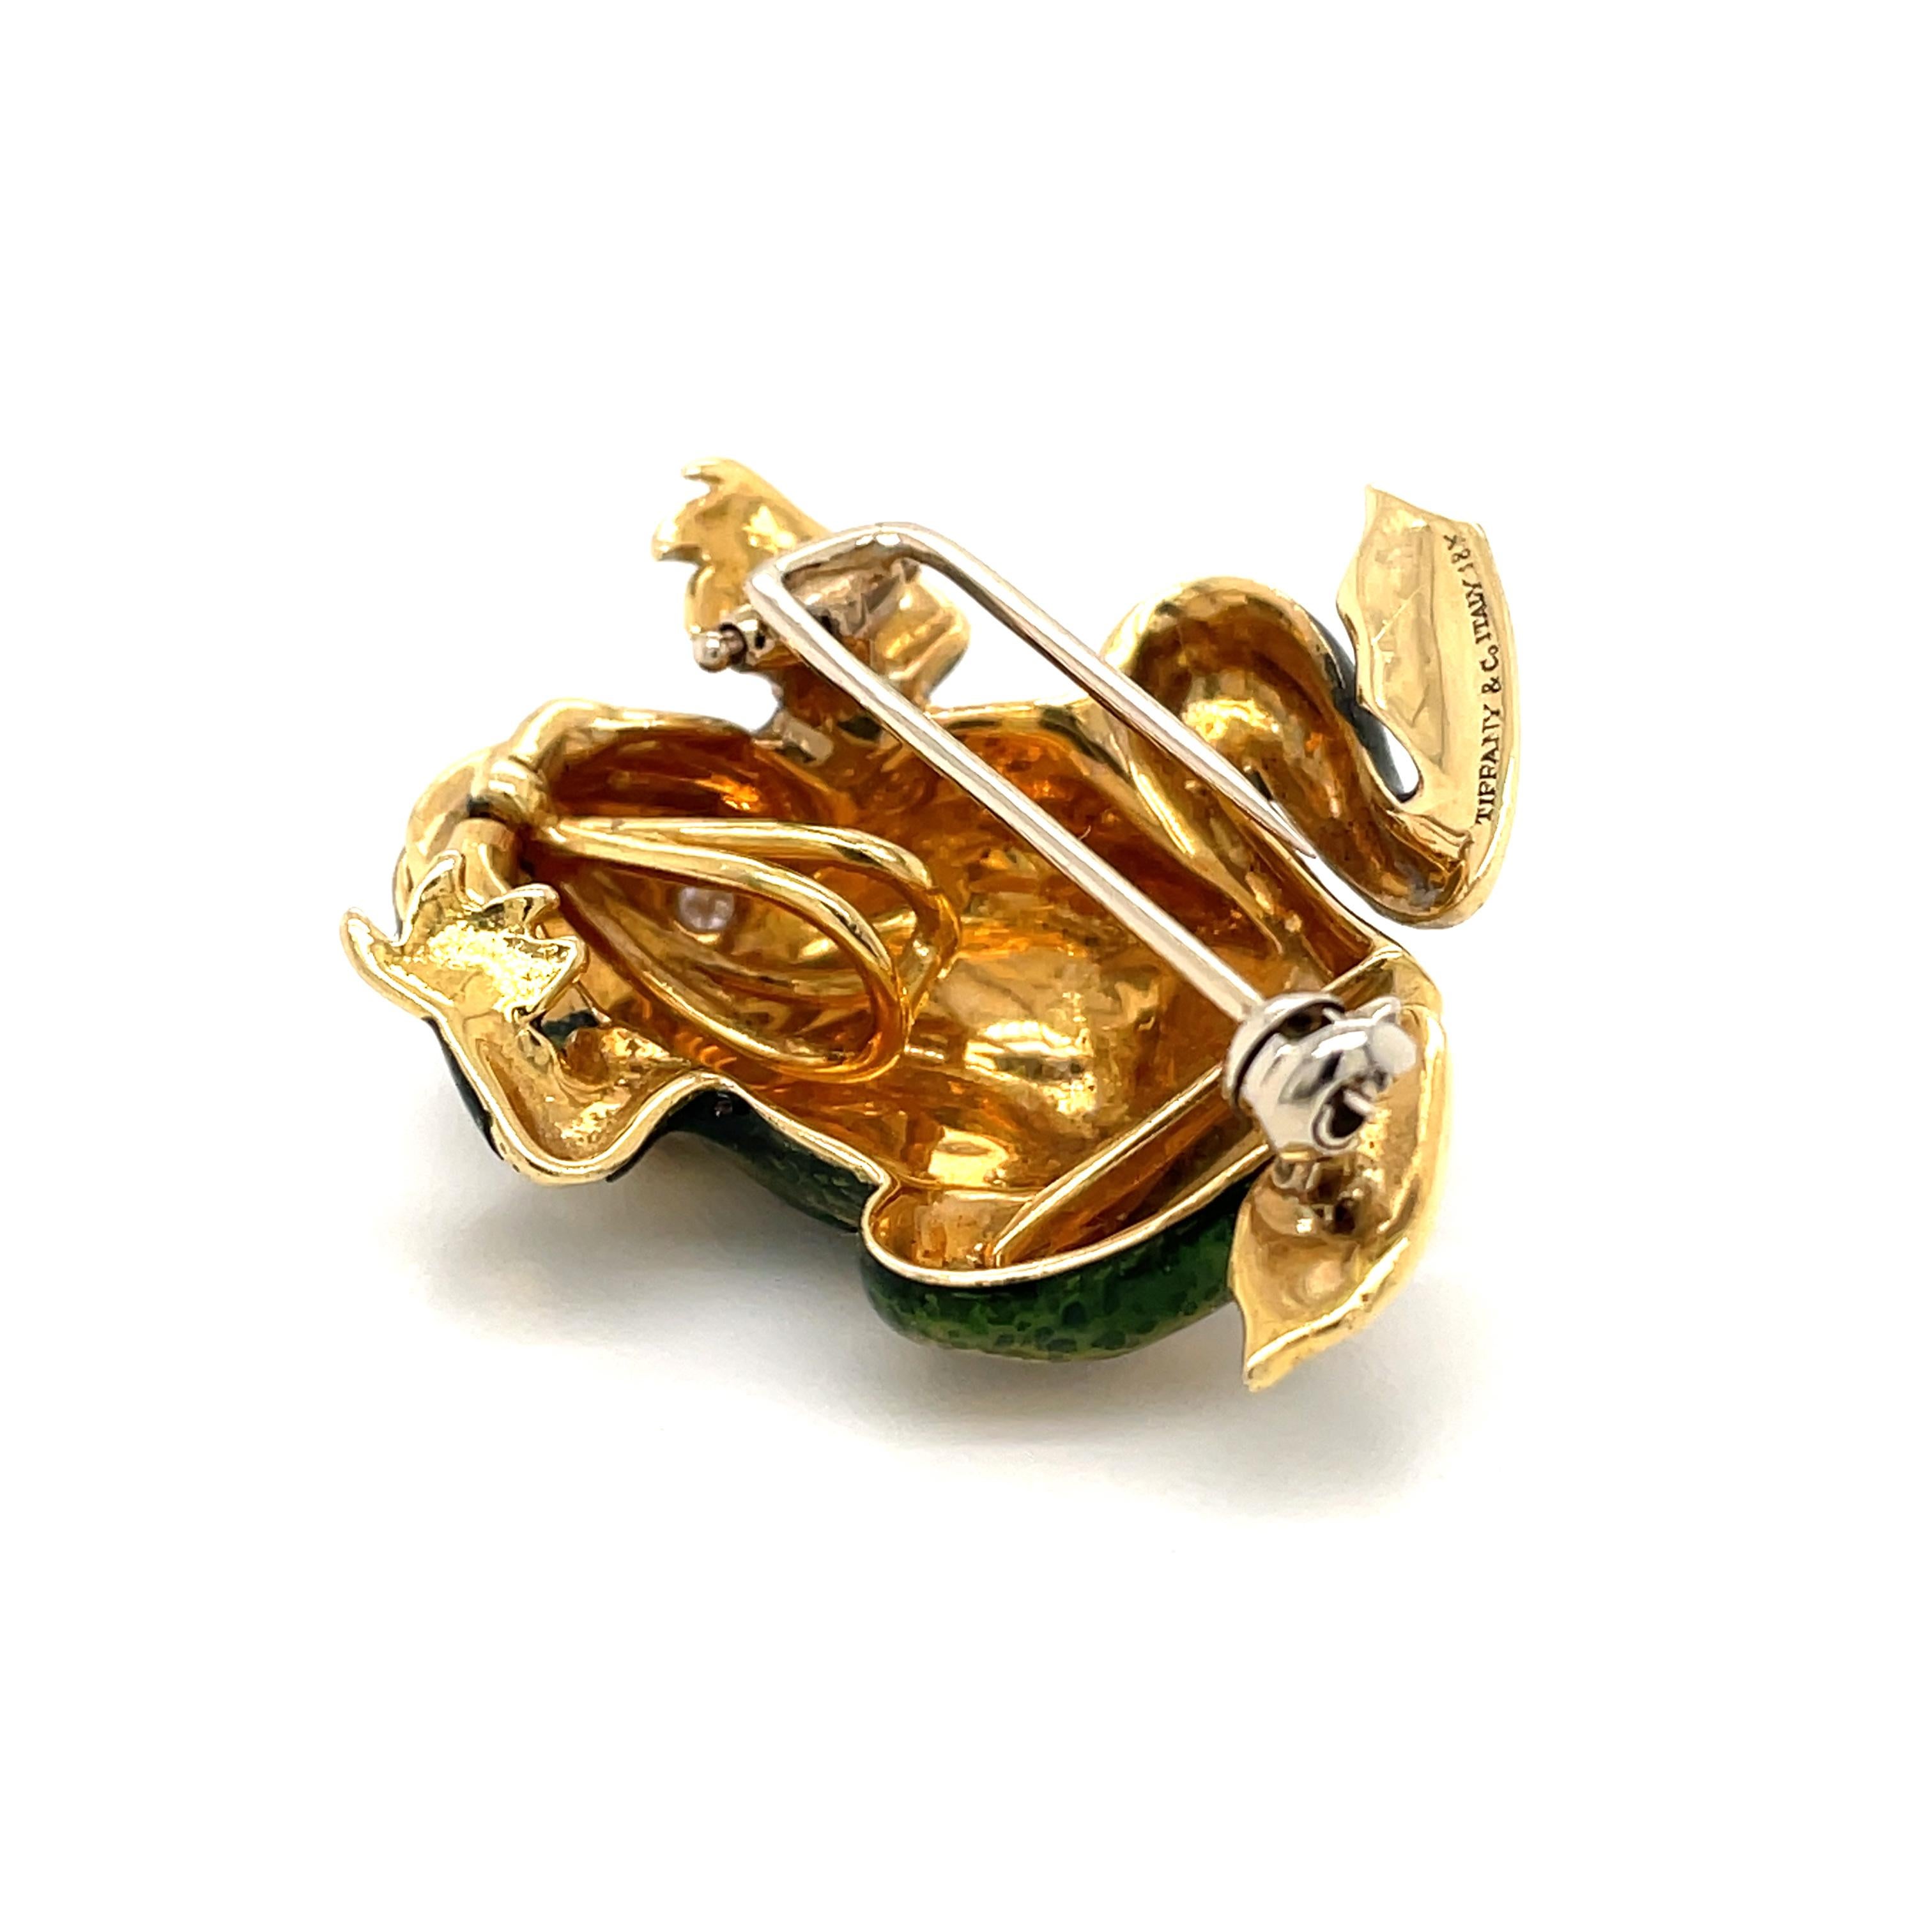 Tiffany & Co. Enamel and Diamond Frog Pendant / Brooch, 18 Karat Gold In Excellent Condition For Sale In Napoli, Italy